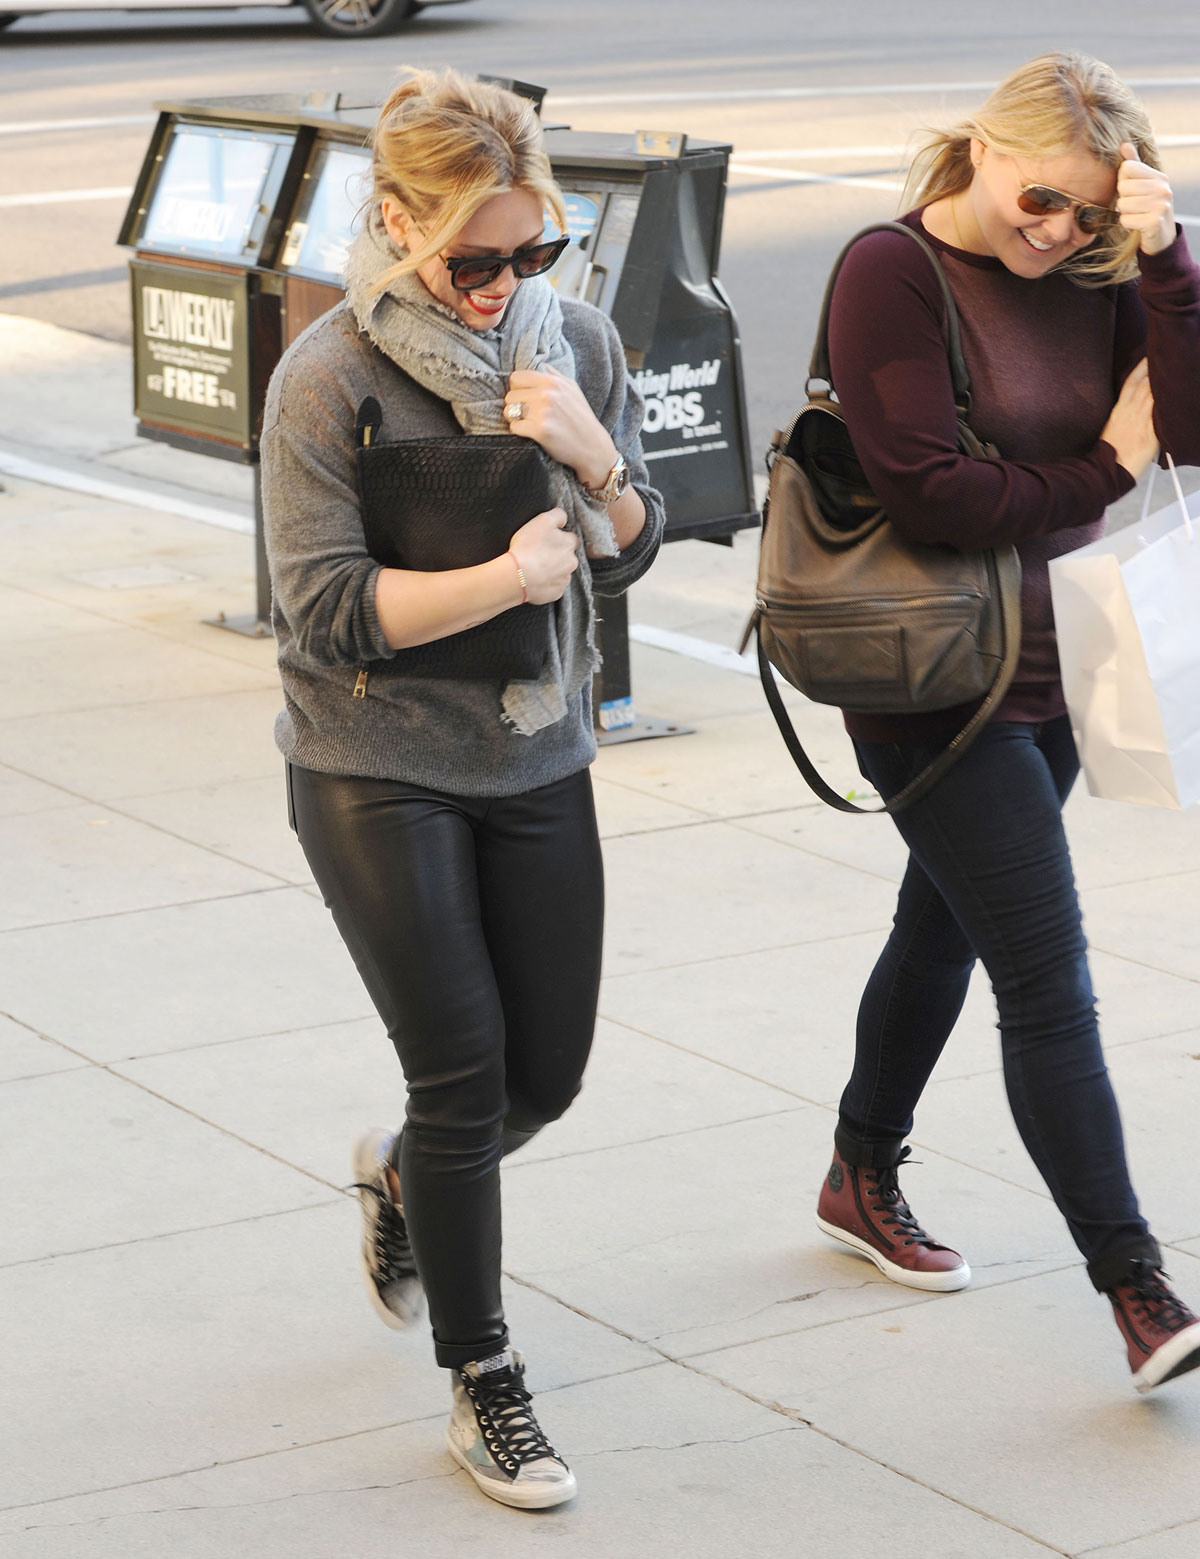 Hilary Duff seen out and about in LA